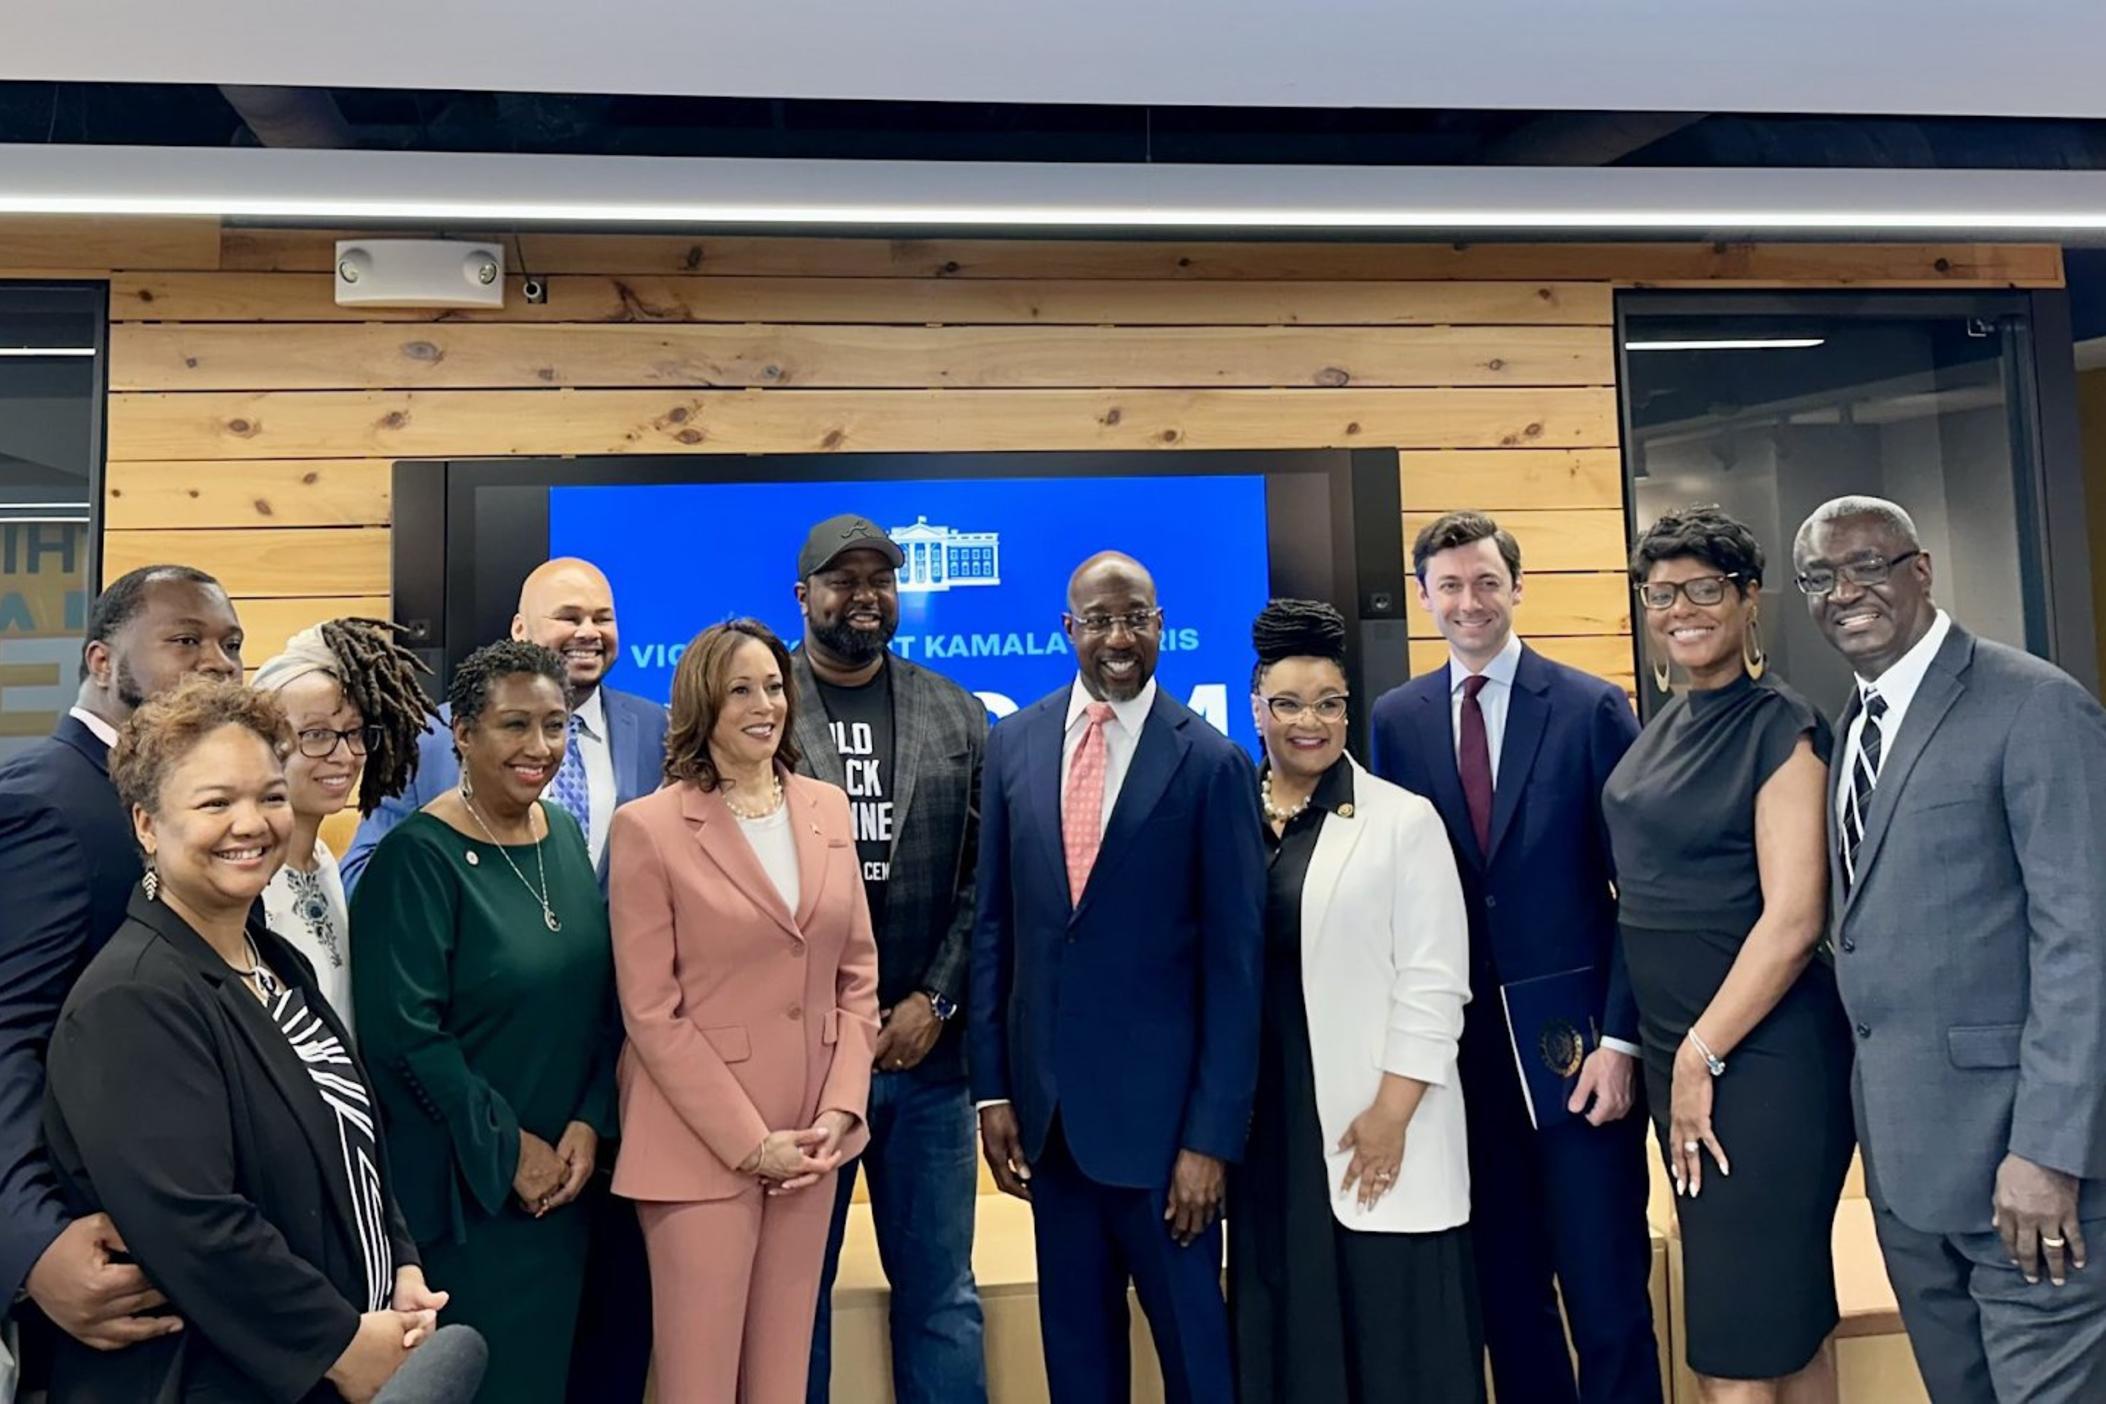 Vice President Kamala Harris (center, pink suit) joined Sens. Ossoff (third from right) and Warnock (center, pink tie) and Rep. Nikema Williams (fourth from right) along with other leaders at the Russell Innovation Center for Entrepreneurs on April 29, 2024.